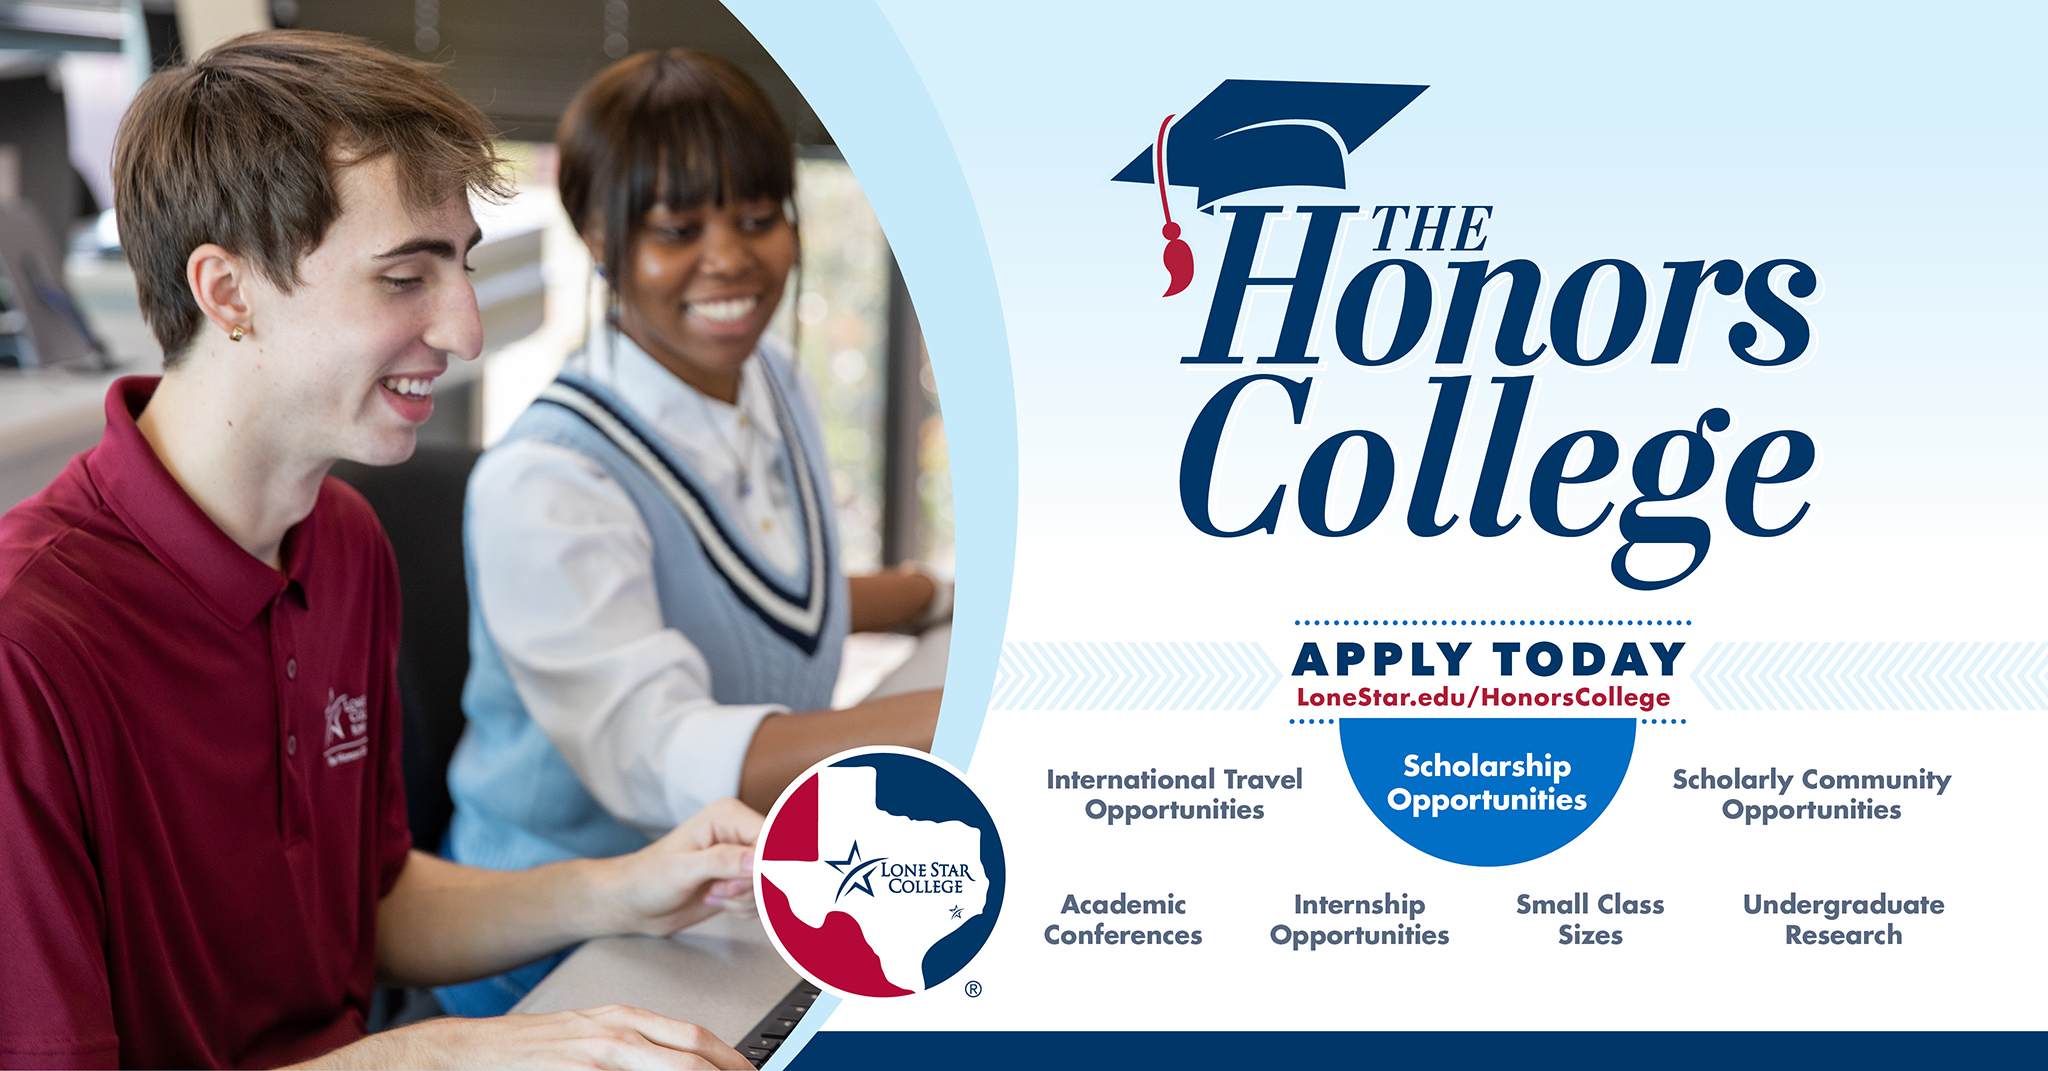 Apply today for the LSC Honors College